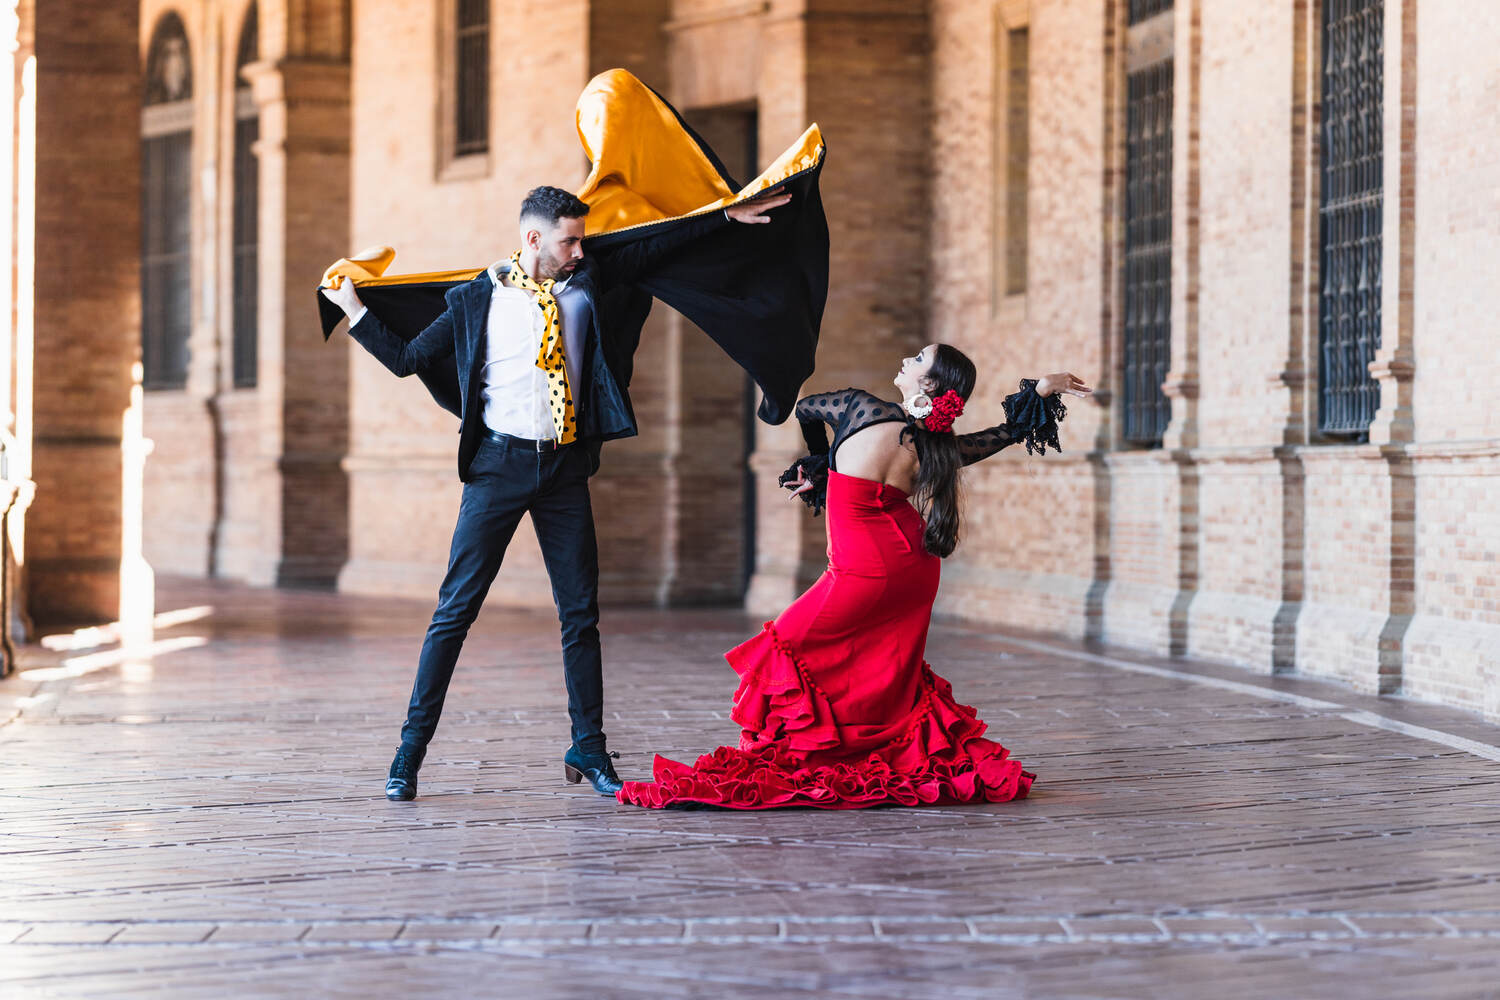 Flamenco dancer in traditional red dress performing in front of a historic building.